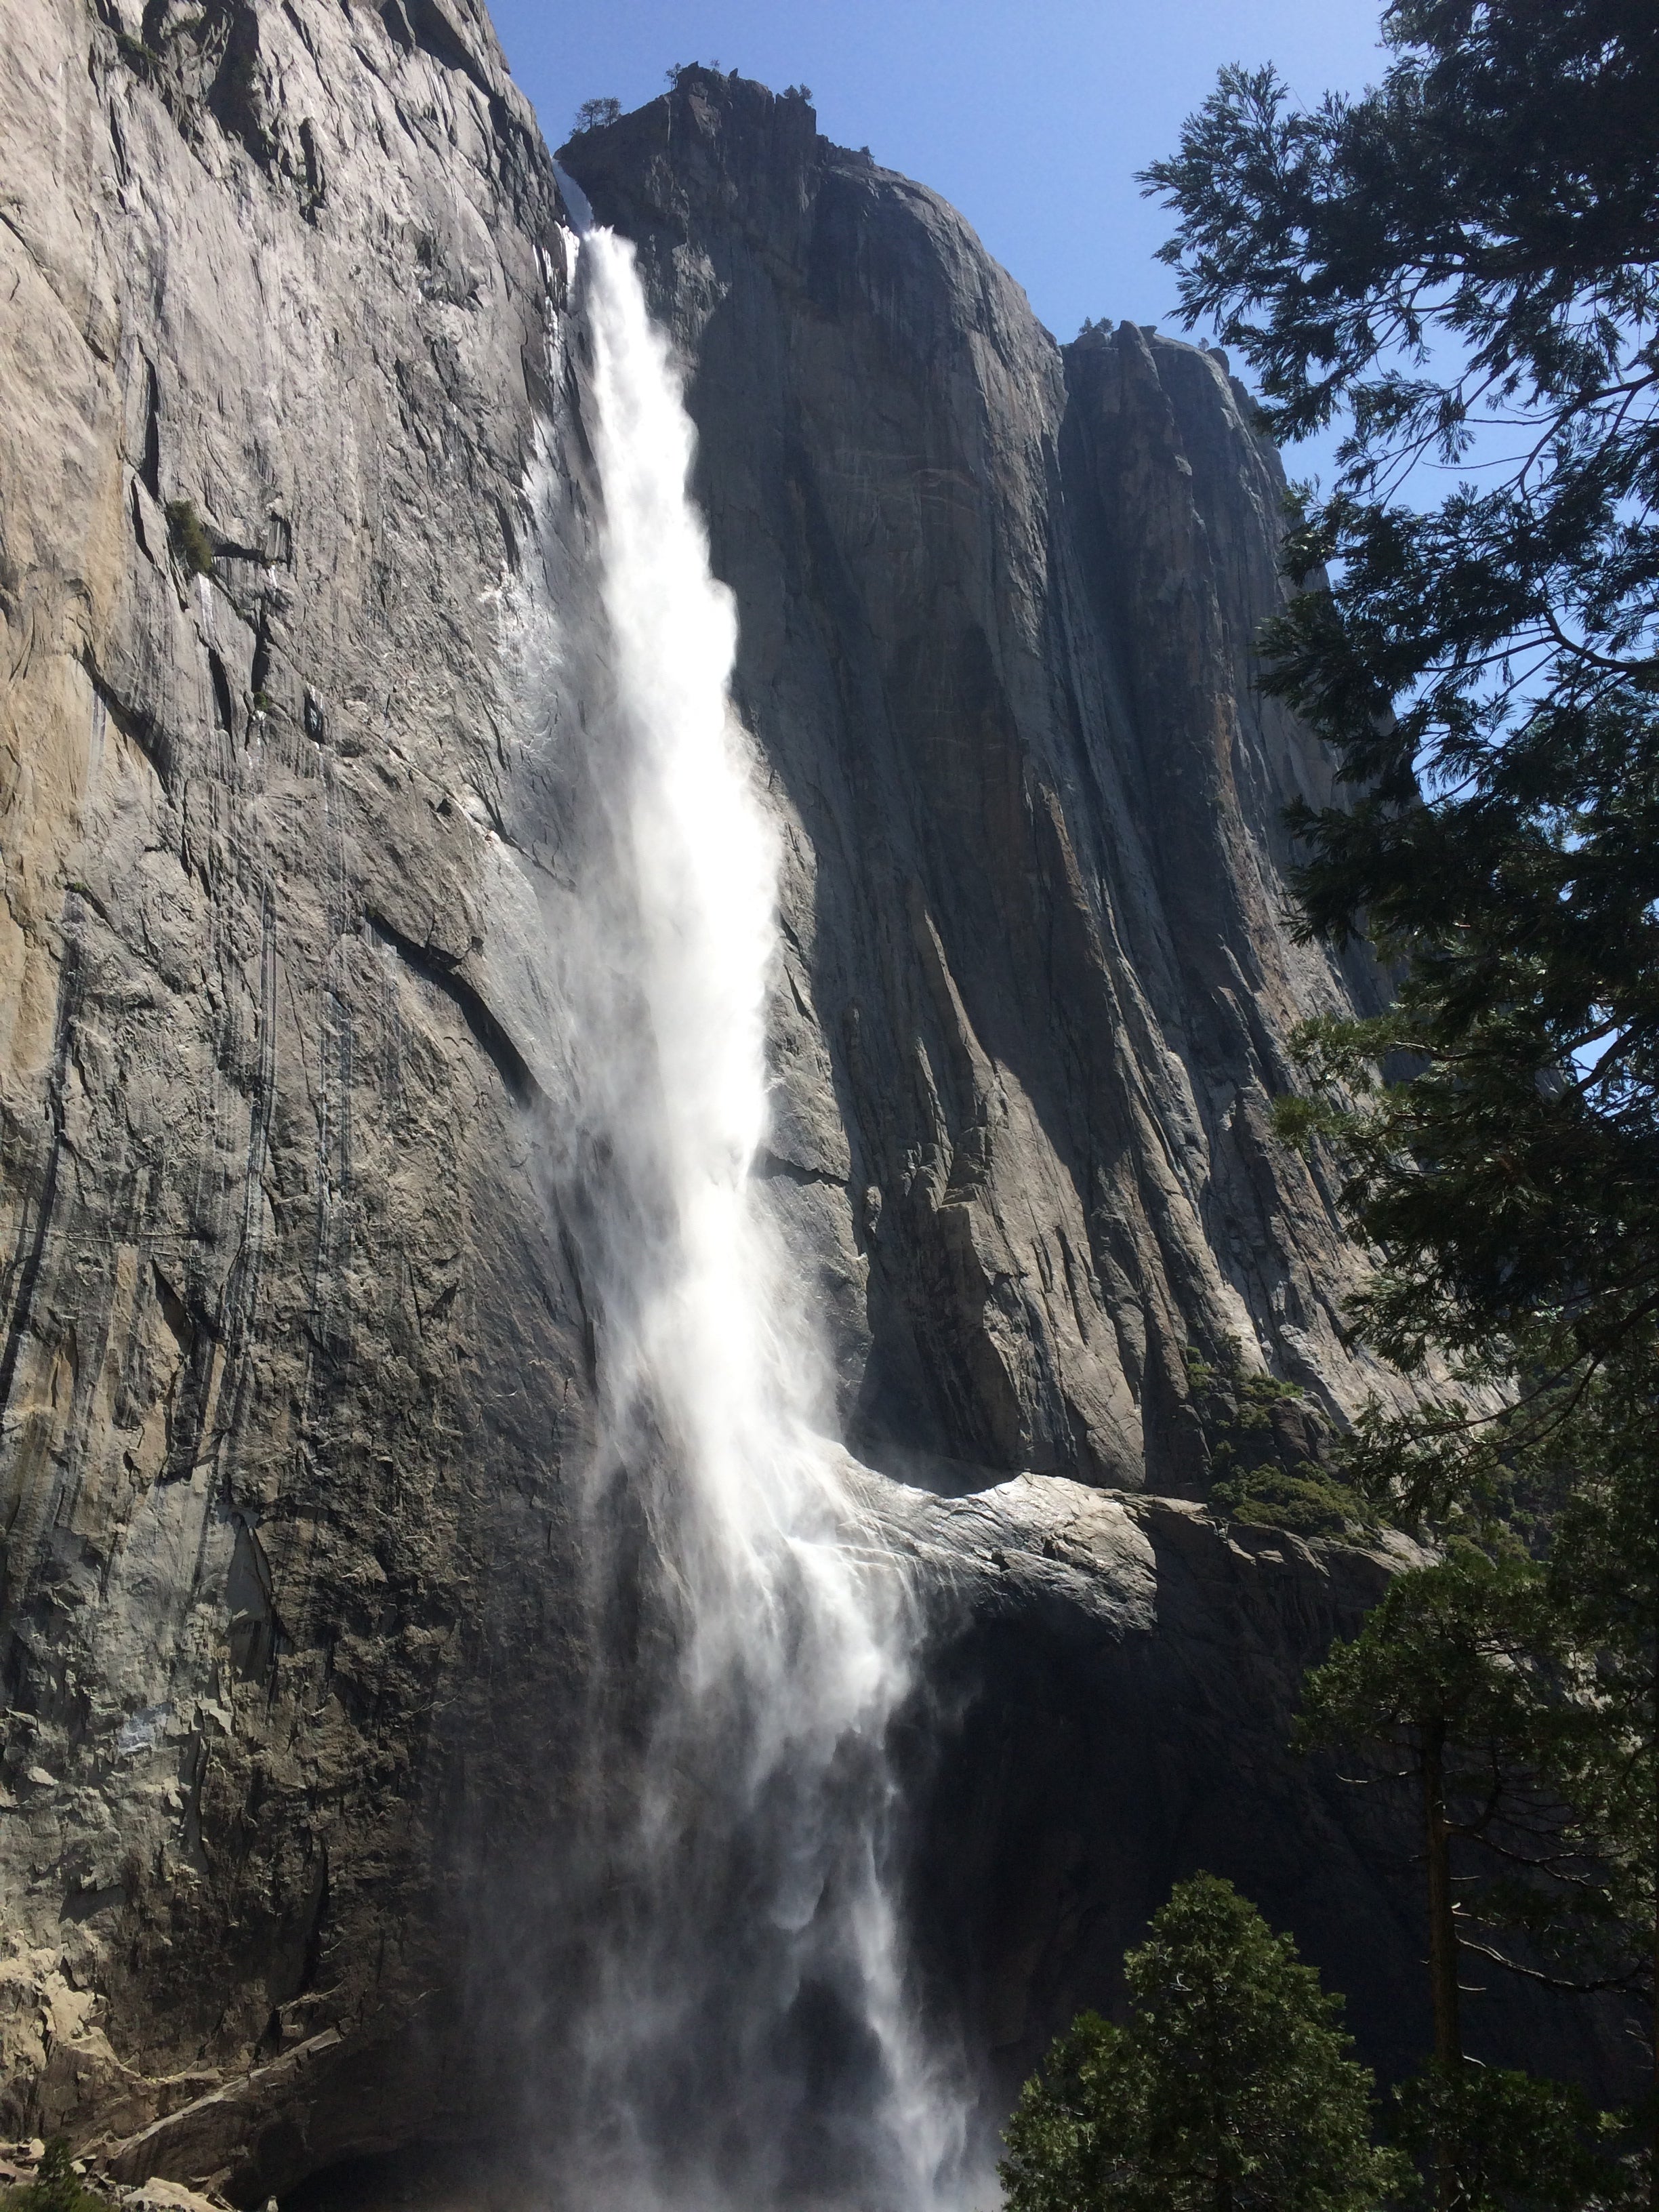 Camper submitted image from Upper Pines Campground — Yosemite National Park - 5